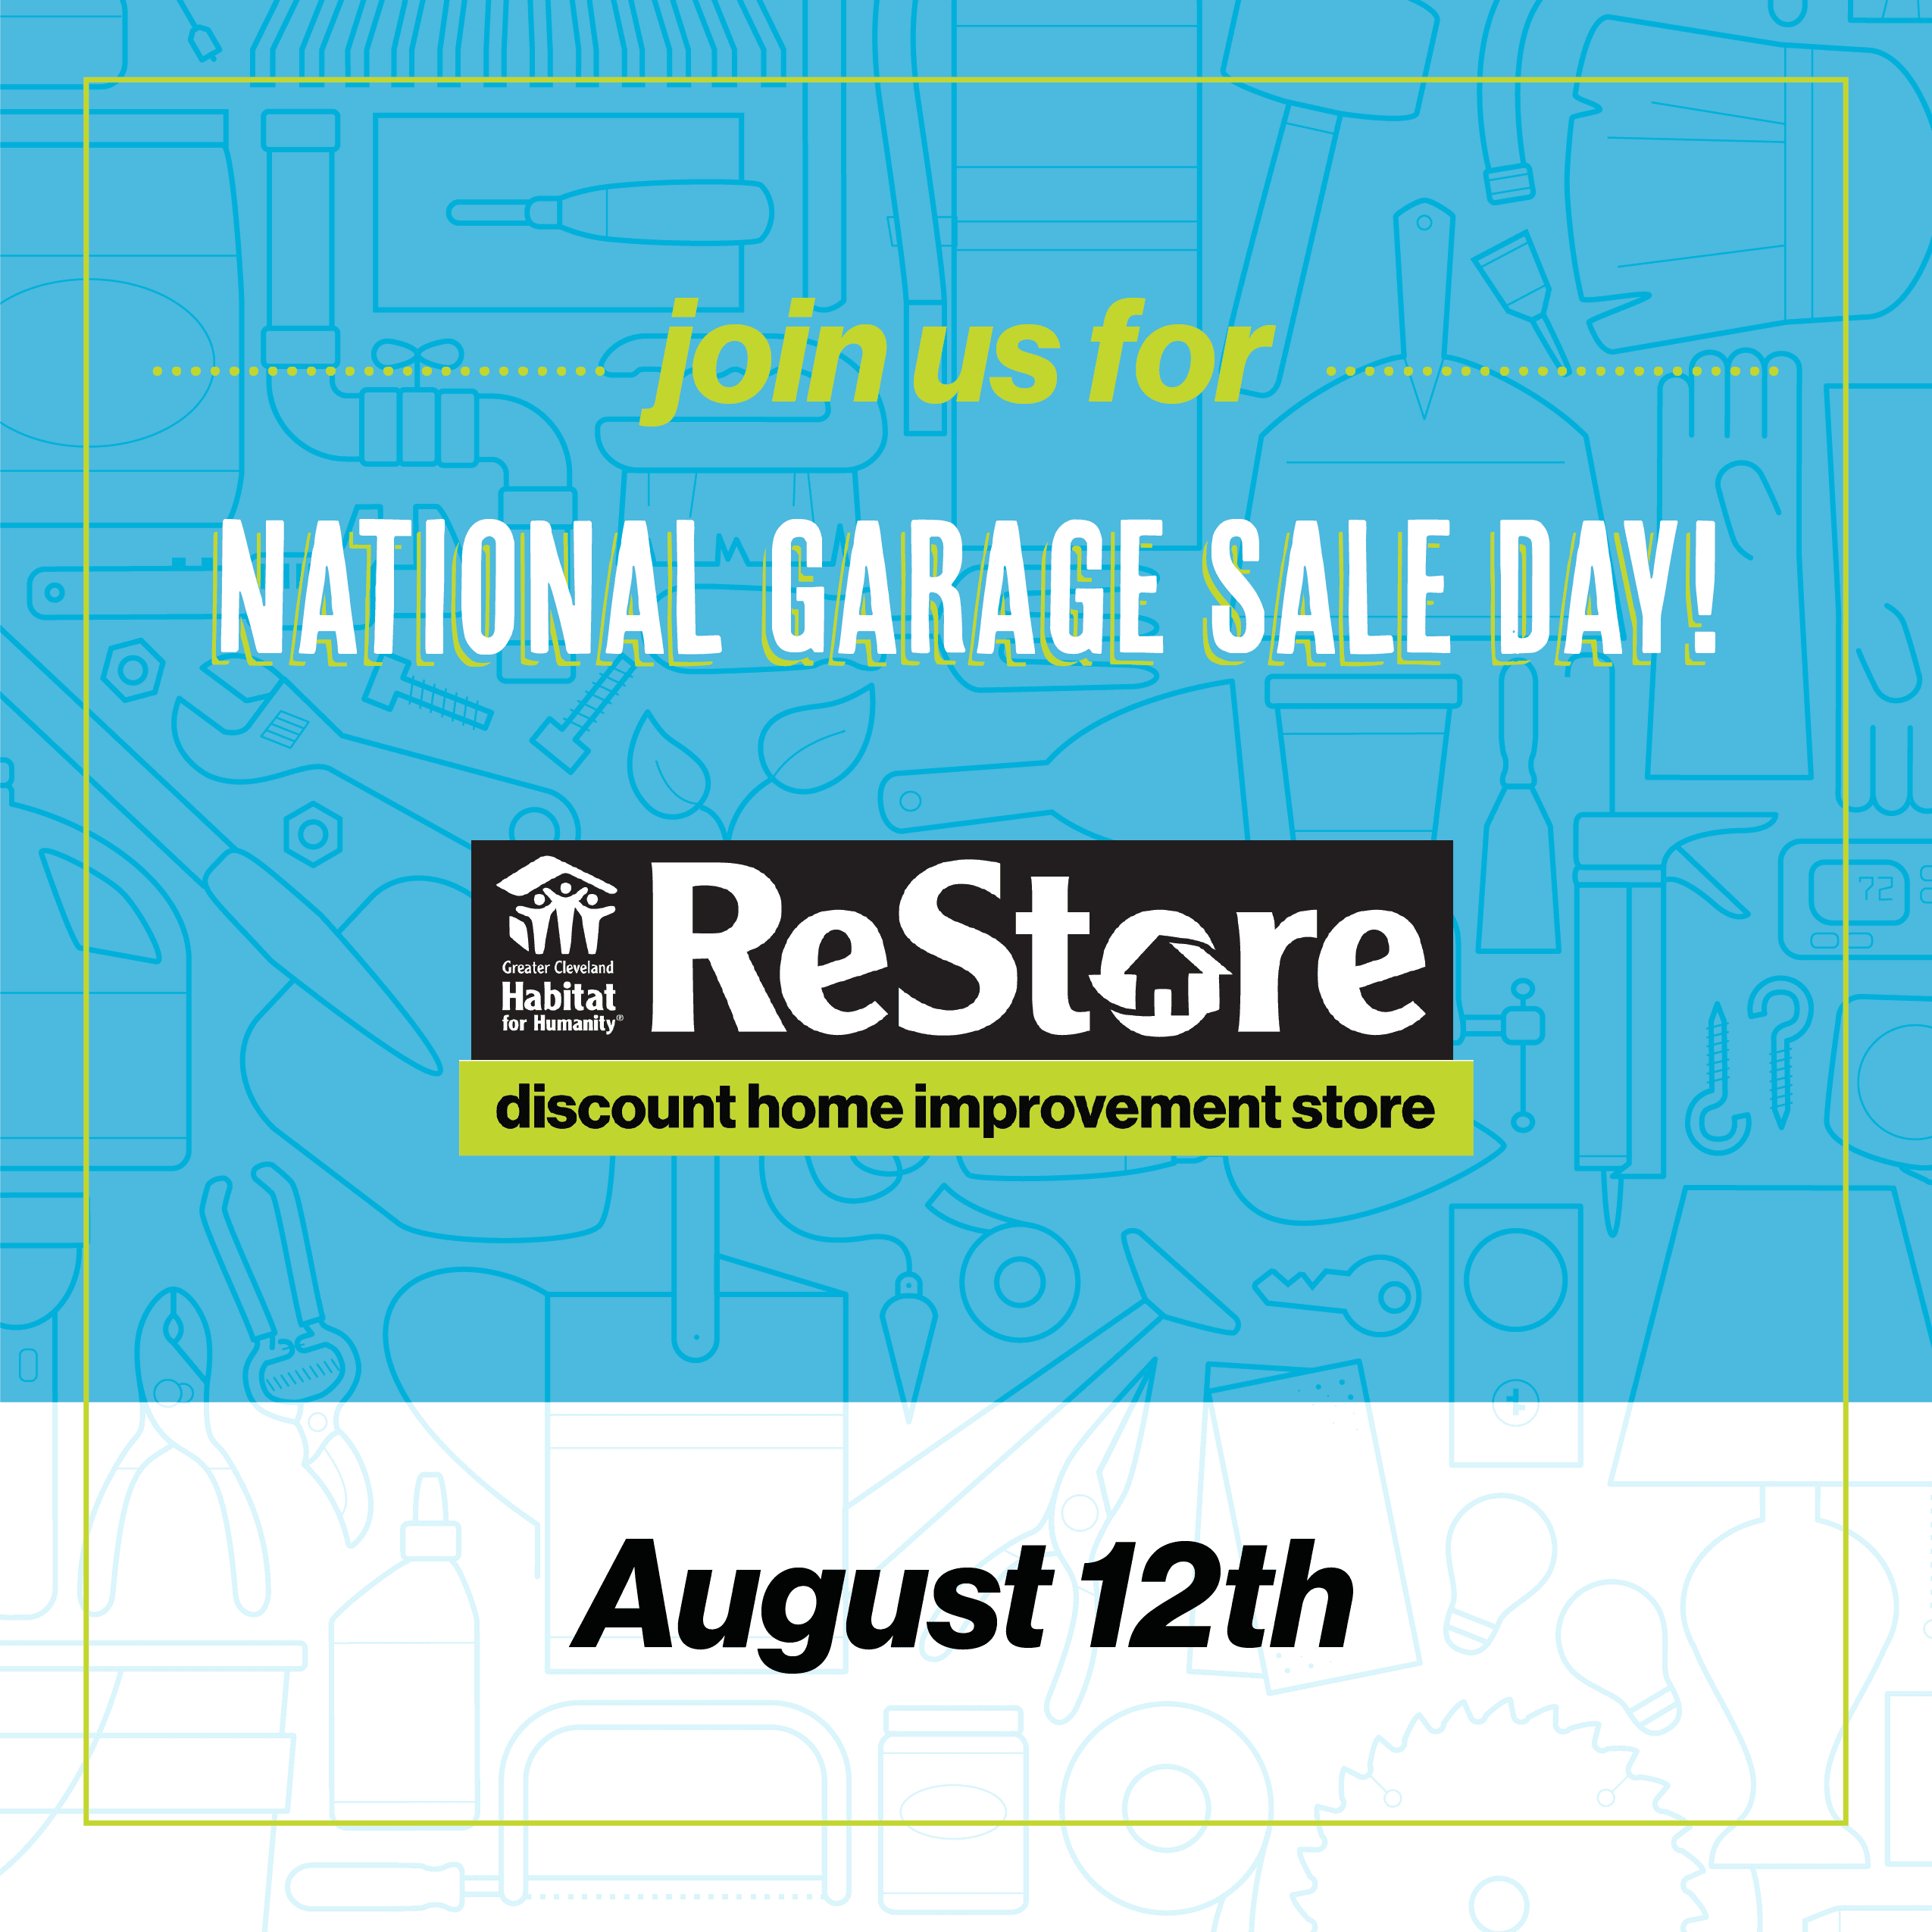 Celebrate Garage Sale Day At Our 3 Greater Cleveland ReStores Aug. 12th